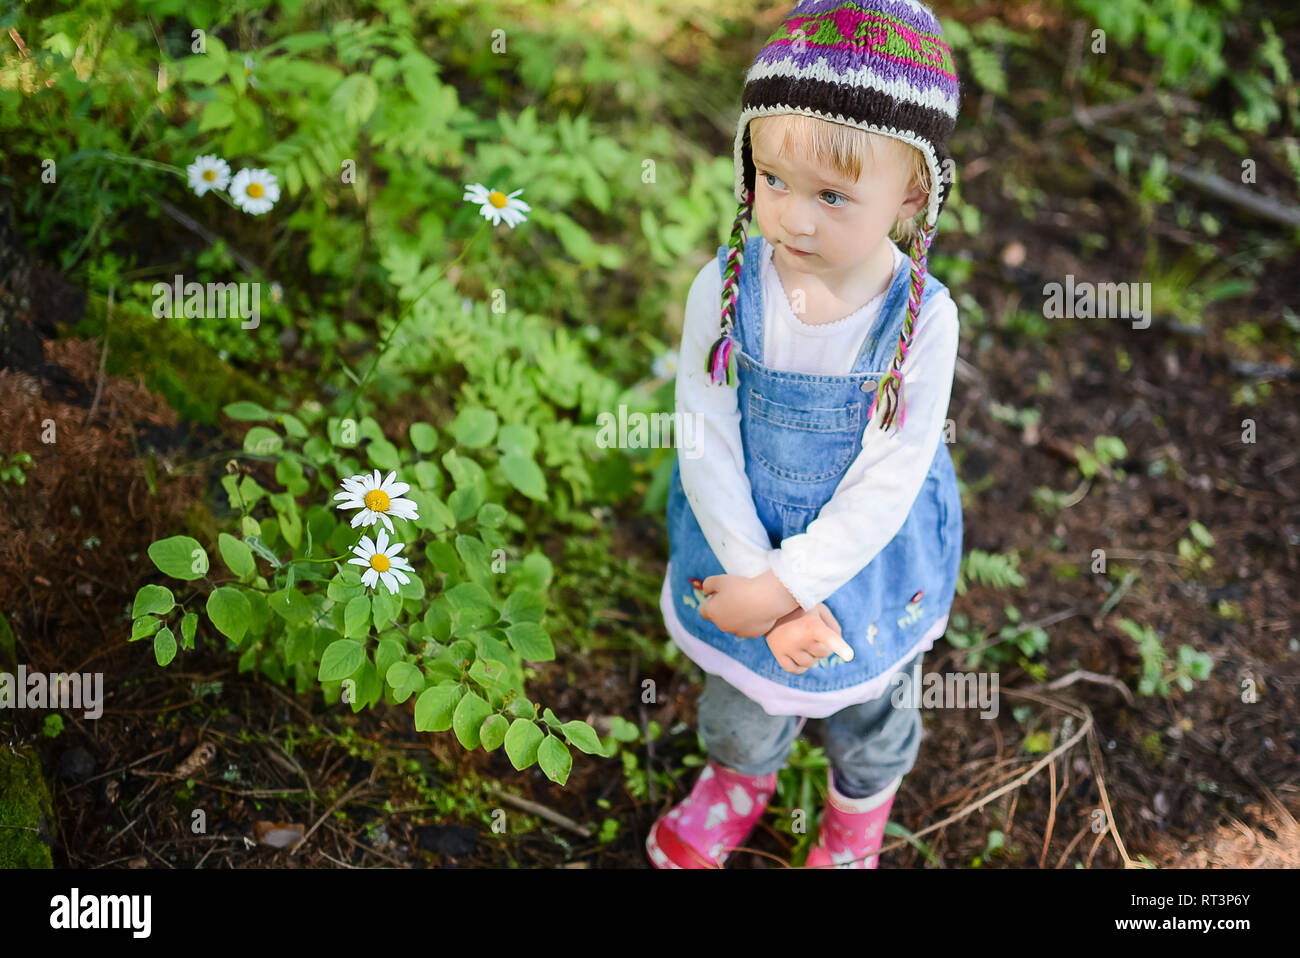 Portrait of sad little girl wearing knitted hat and denim dress outdoors Stock Photo